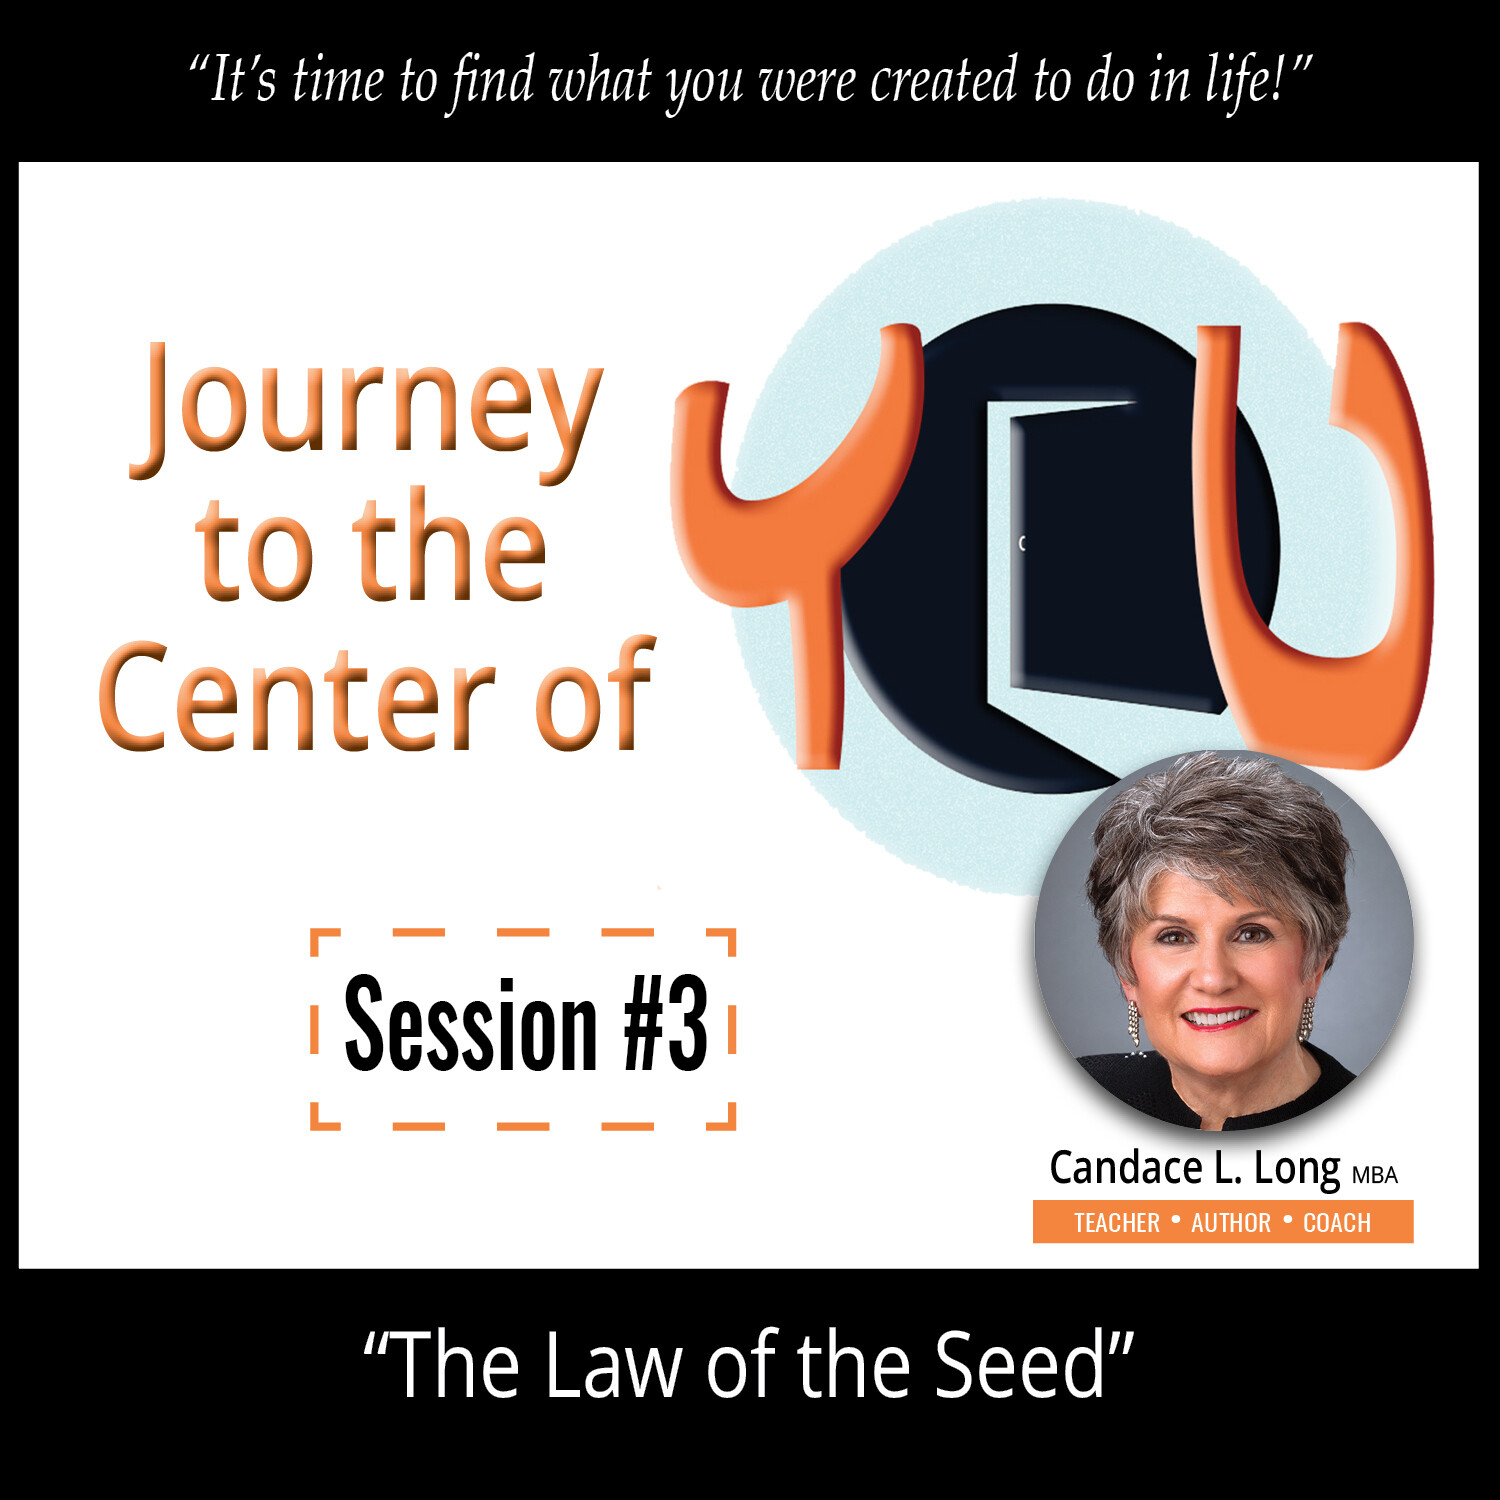 Session #3: THE LAW OF THE SEED